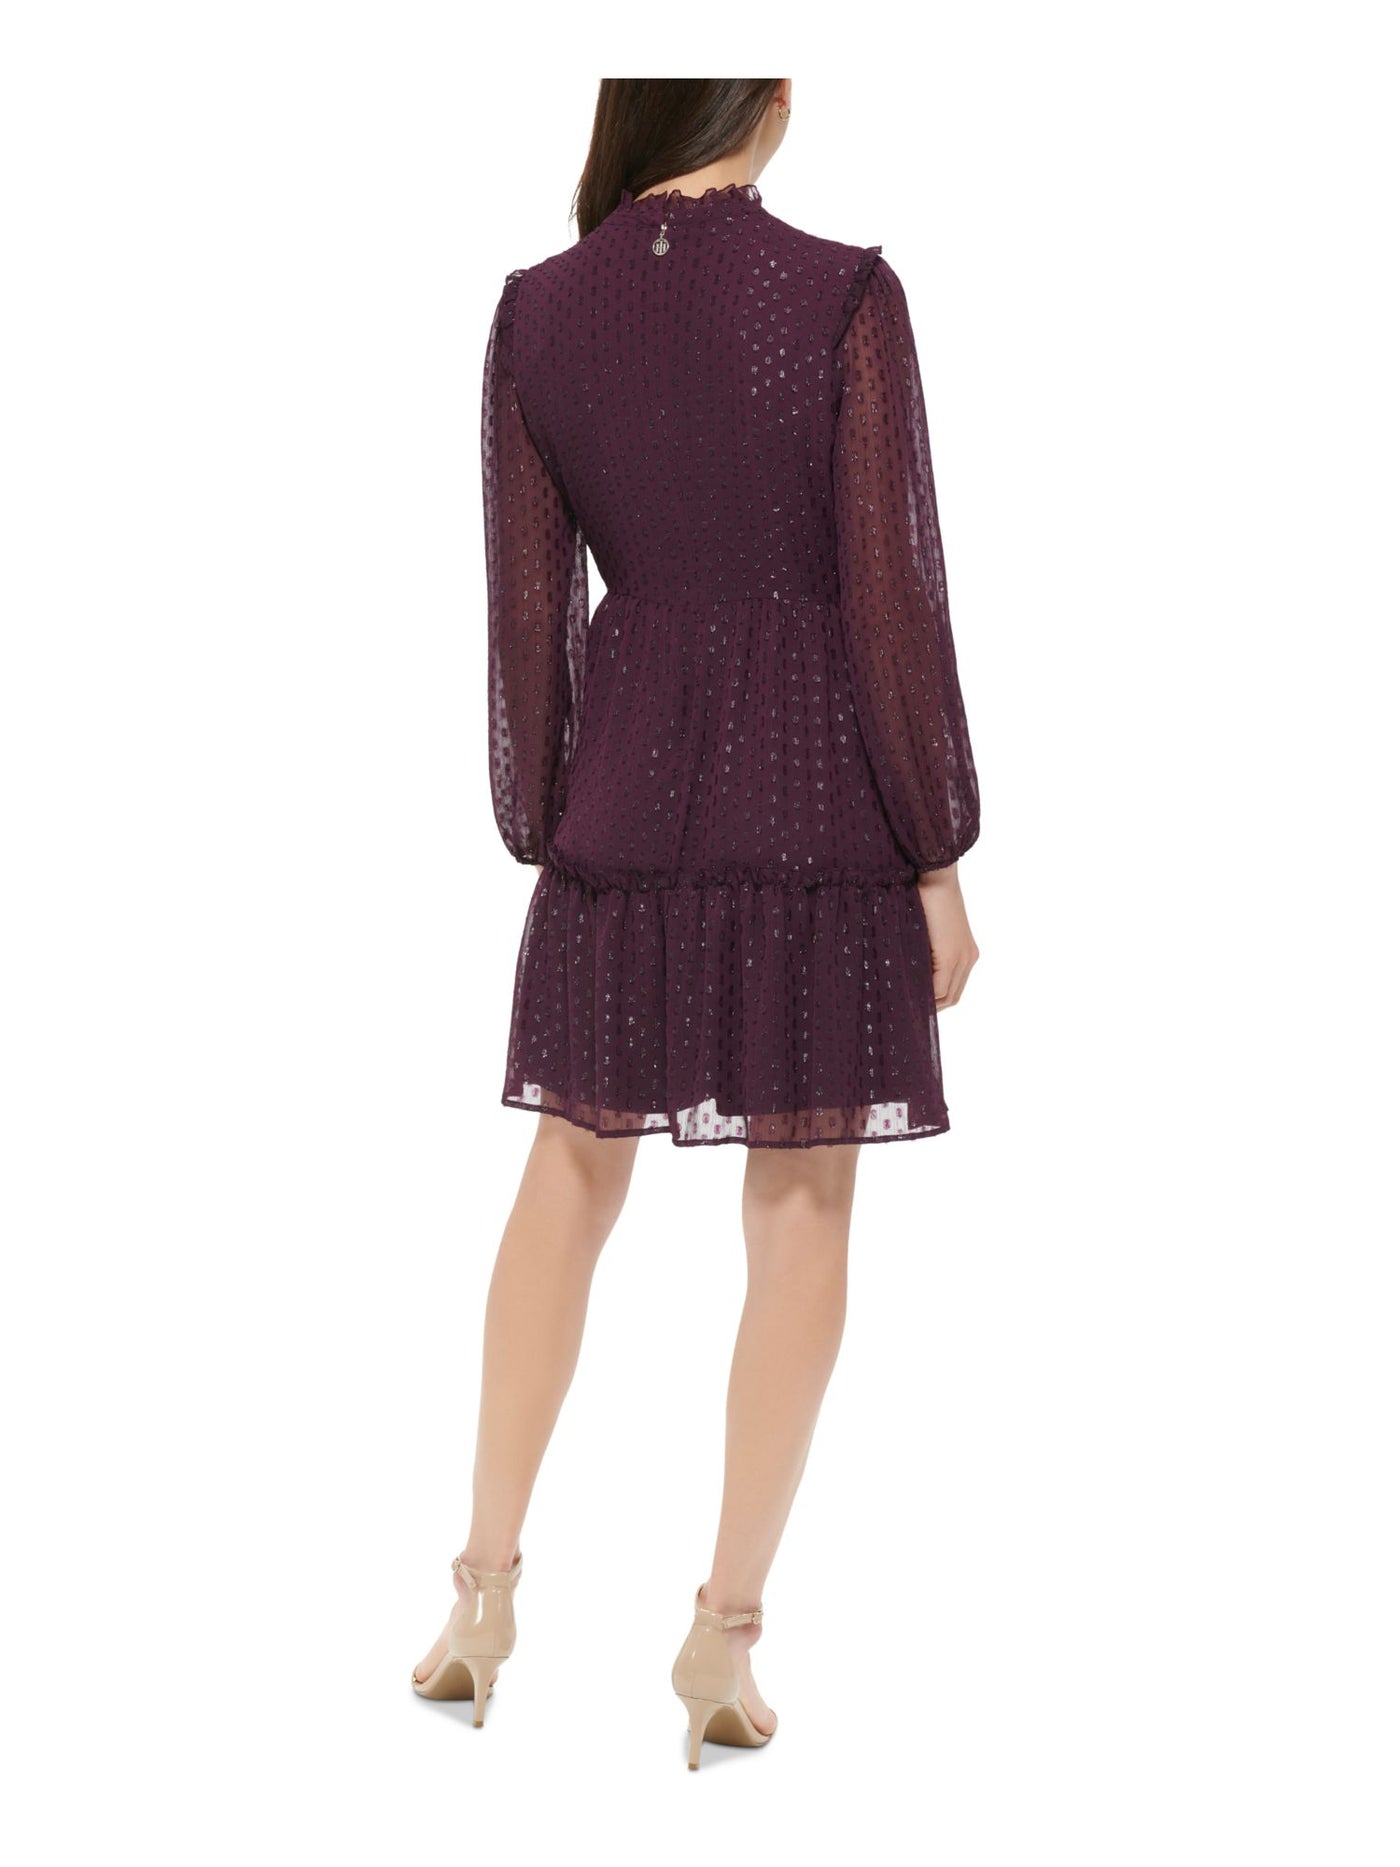 TOMMY HILFIGER Womens Purple Ruffled Long Sleeve Mock Neck Above The Knee Cocktail Shift Dress 14